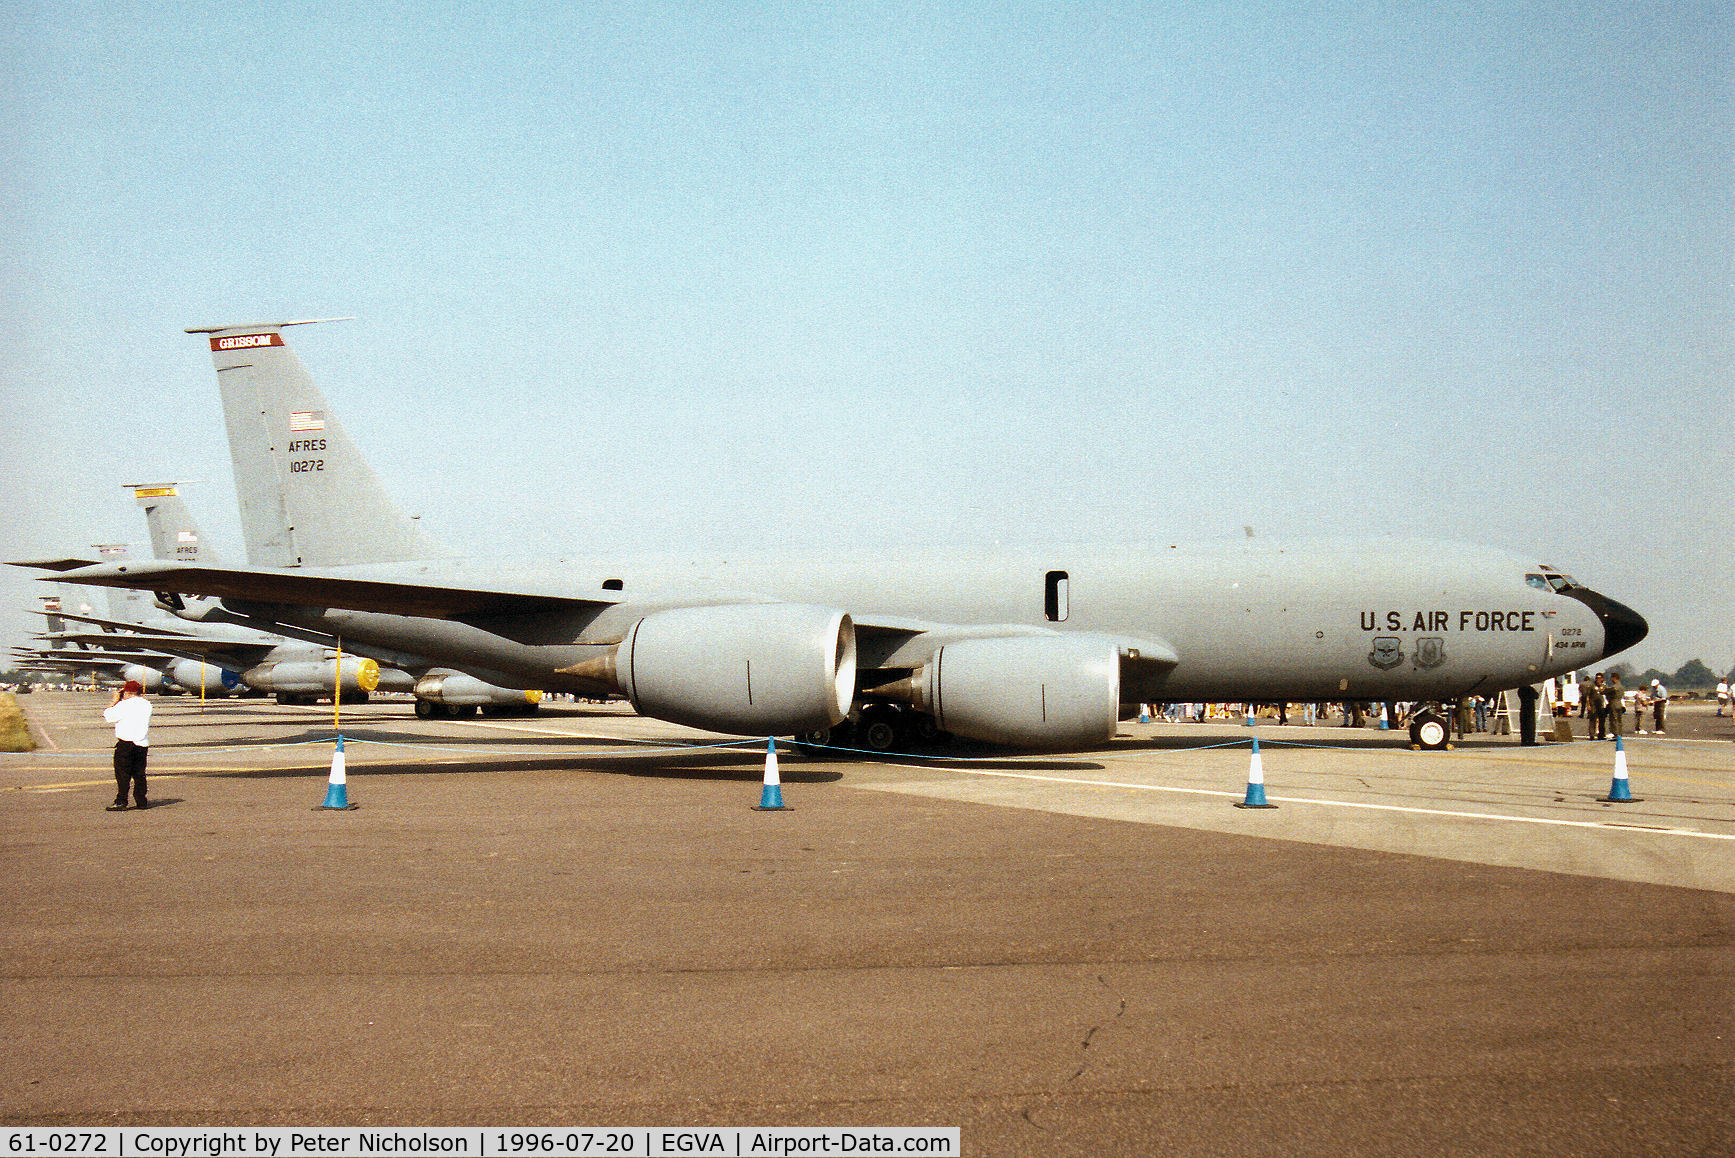 61-0272, 1961 Boeing KC-135R Stratotanker C/N 18179, KC-135R Stratotanker of 434th Air Refuelling Wing at Grissom AFB on display at the 1996 Royal Intnl Air Tattoo at RAF Fairford.